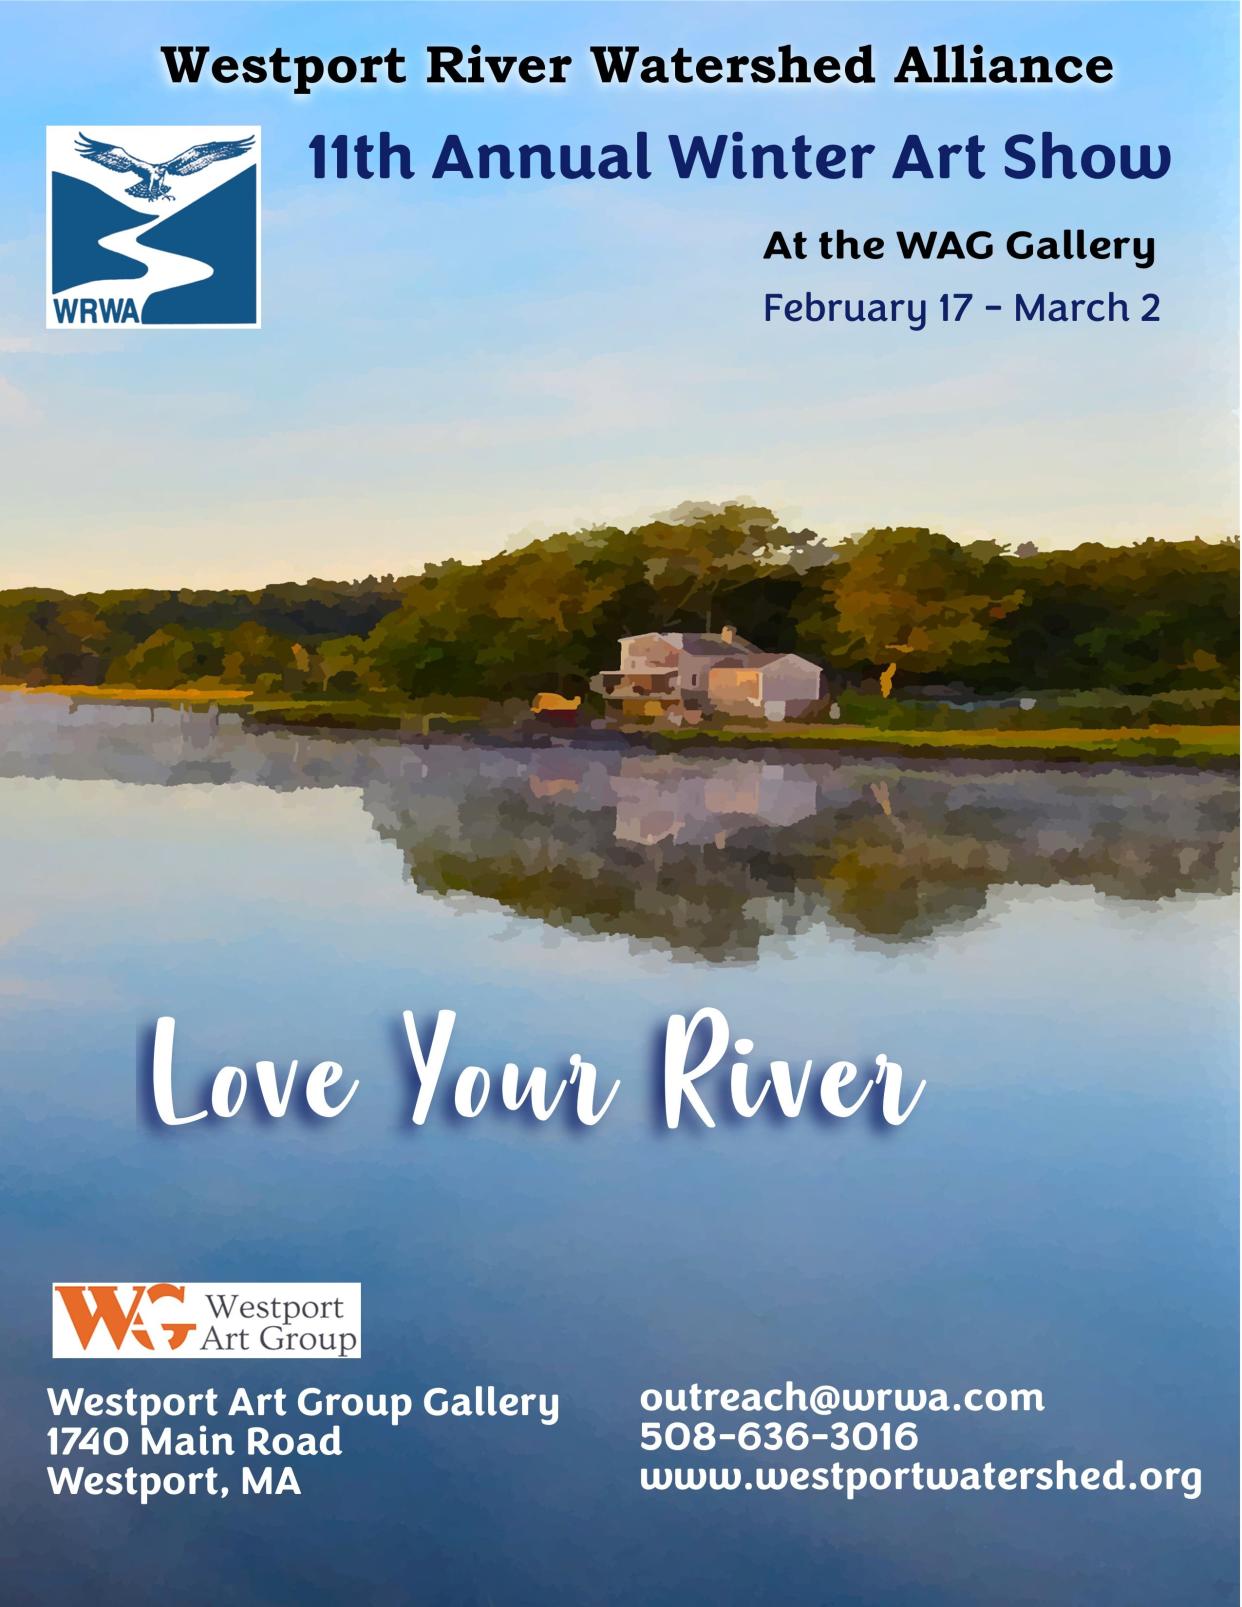 The Westport River Watershed Alliance is hosting its 11th annual Winter Art Show from Feb. 17 to March 2.